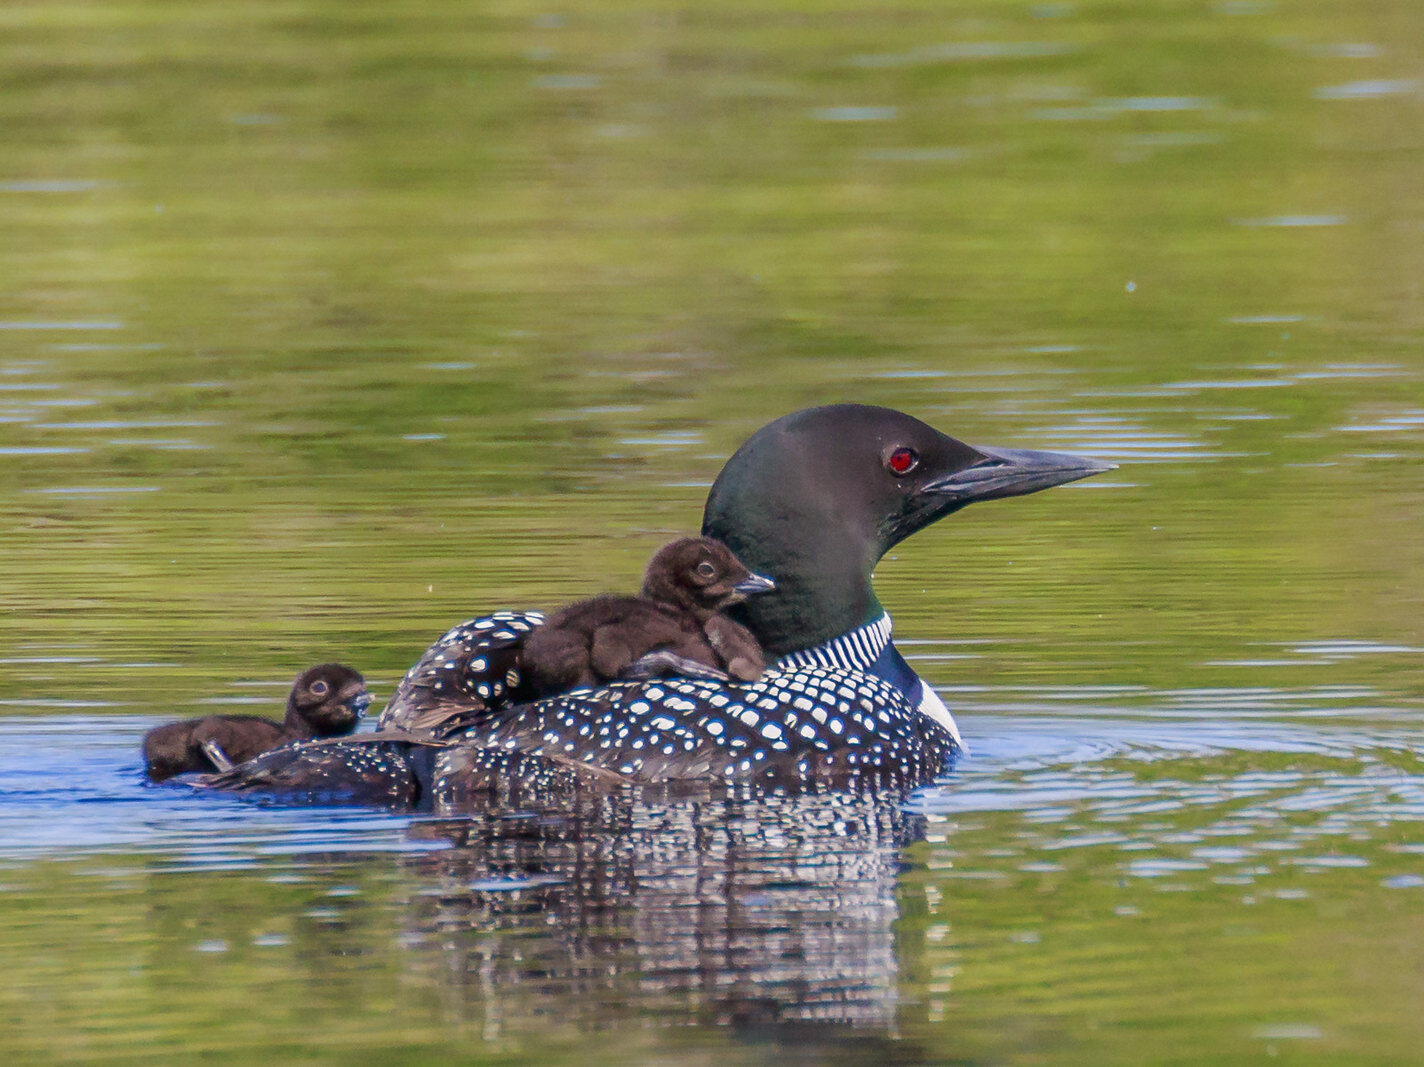 Loon with babies. Photo by Bruce Bartel.